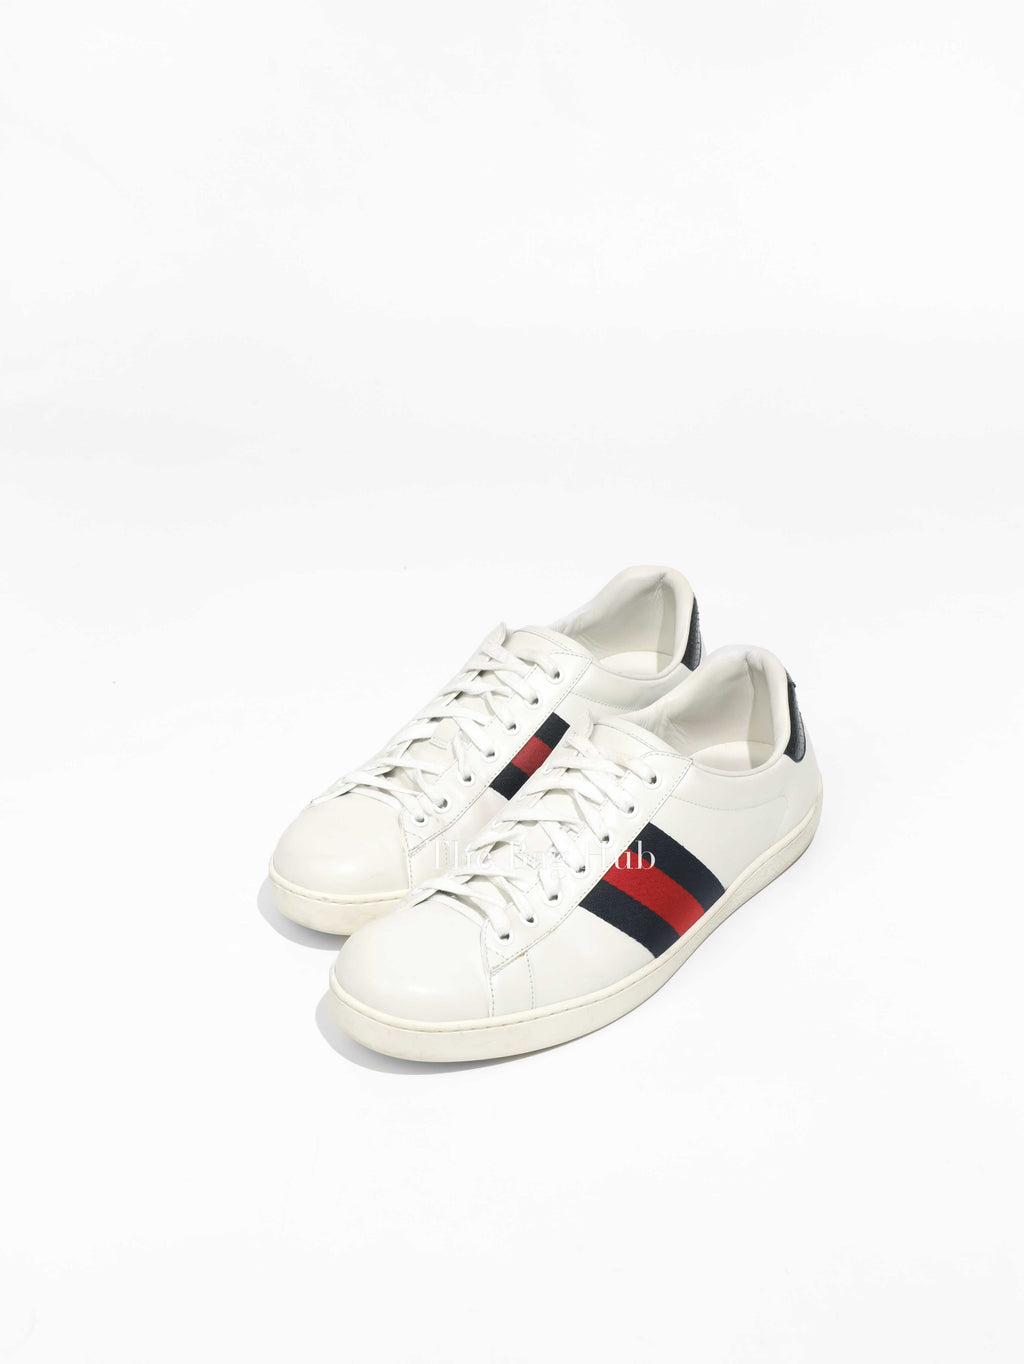 Gucci White Leather Ace Men's Sneakers Size 9